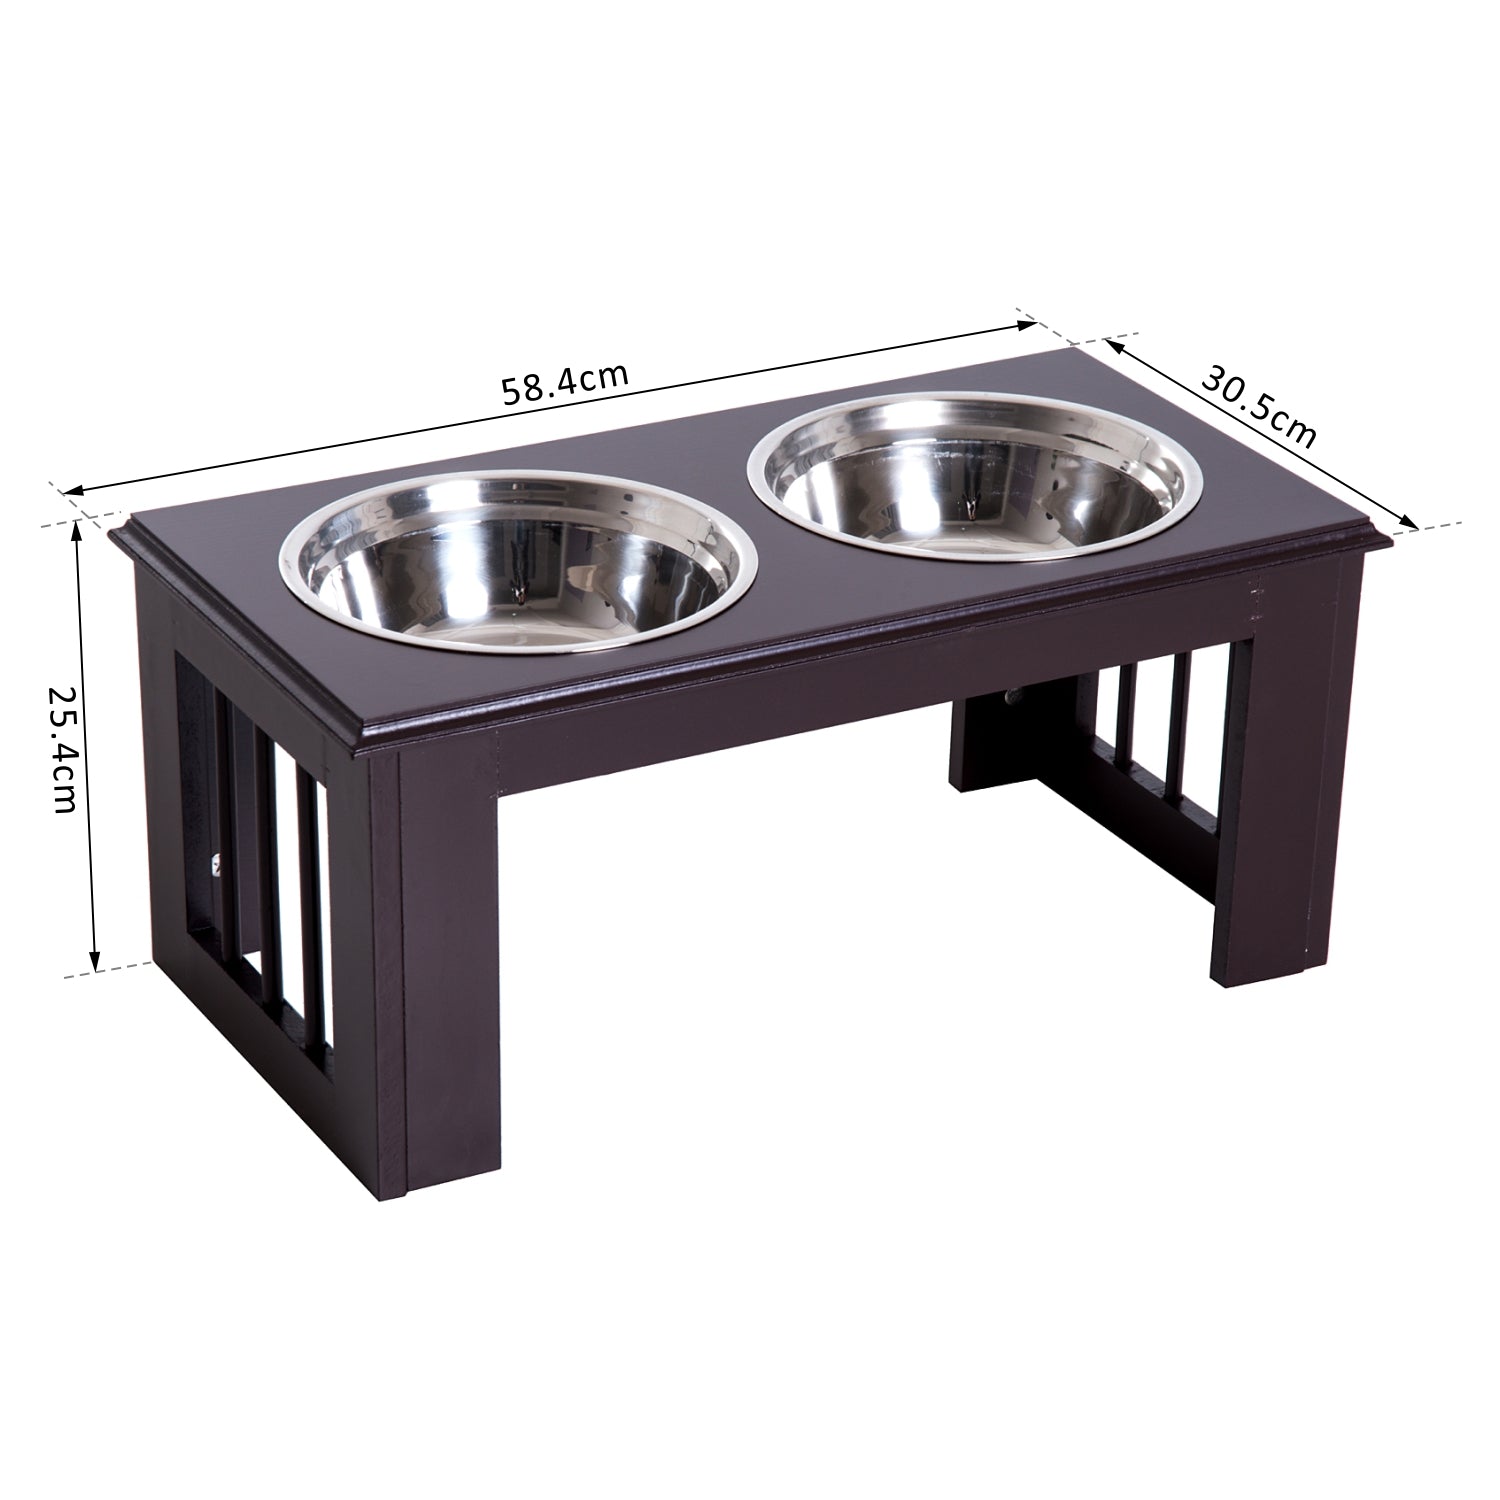 Stainless Steel Pet Feeder , 58.4Lx30.5Wx25.4H cm-Brown